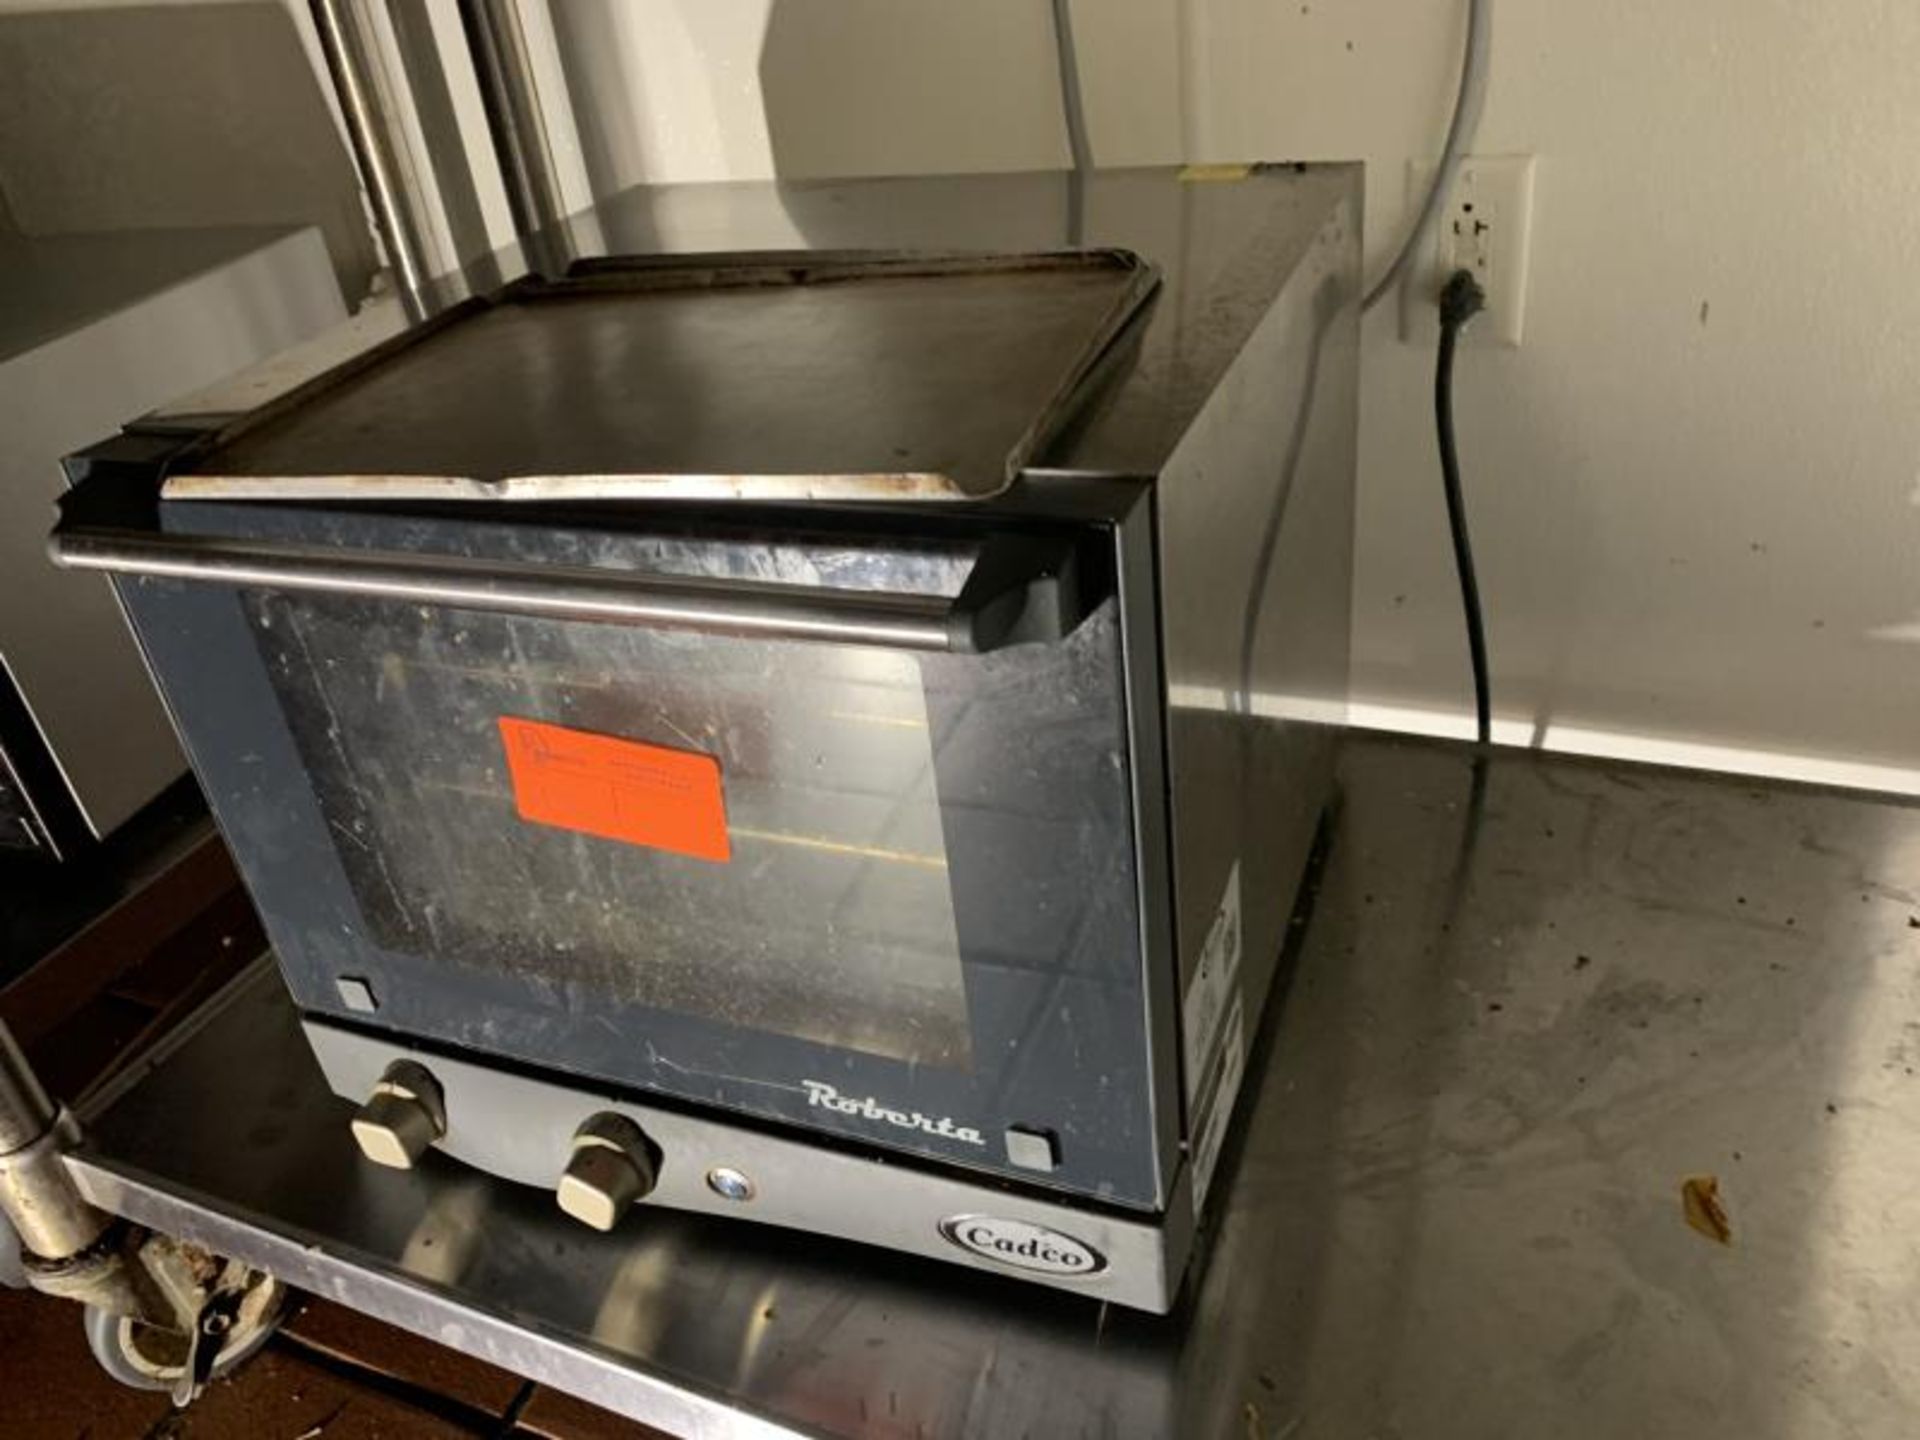 Cadco Roberta Electric Convection Oven, Model: - Image 2 of 3